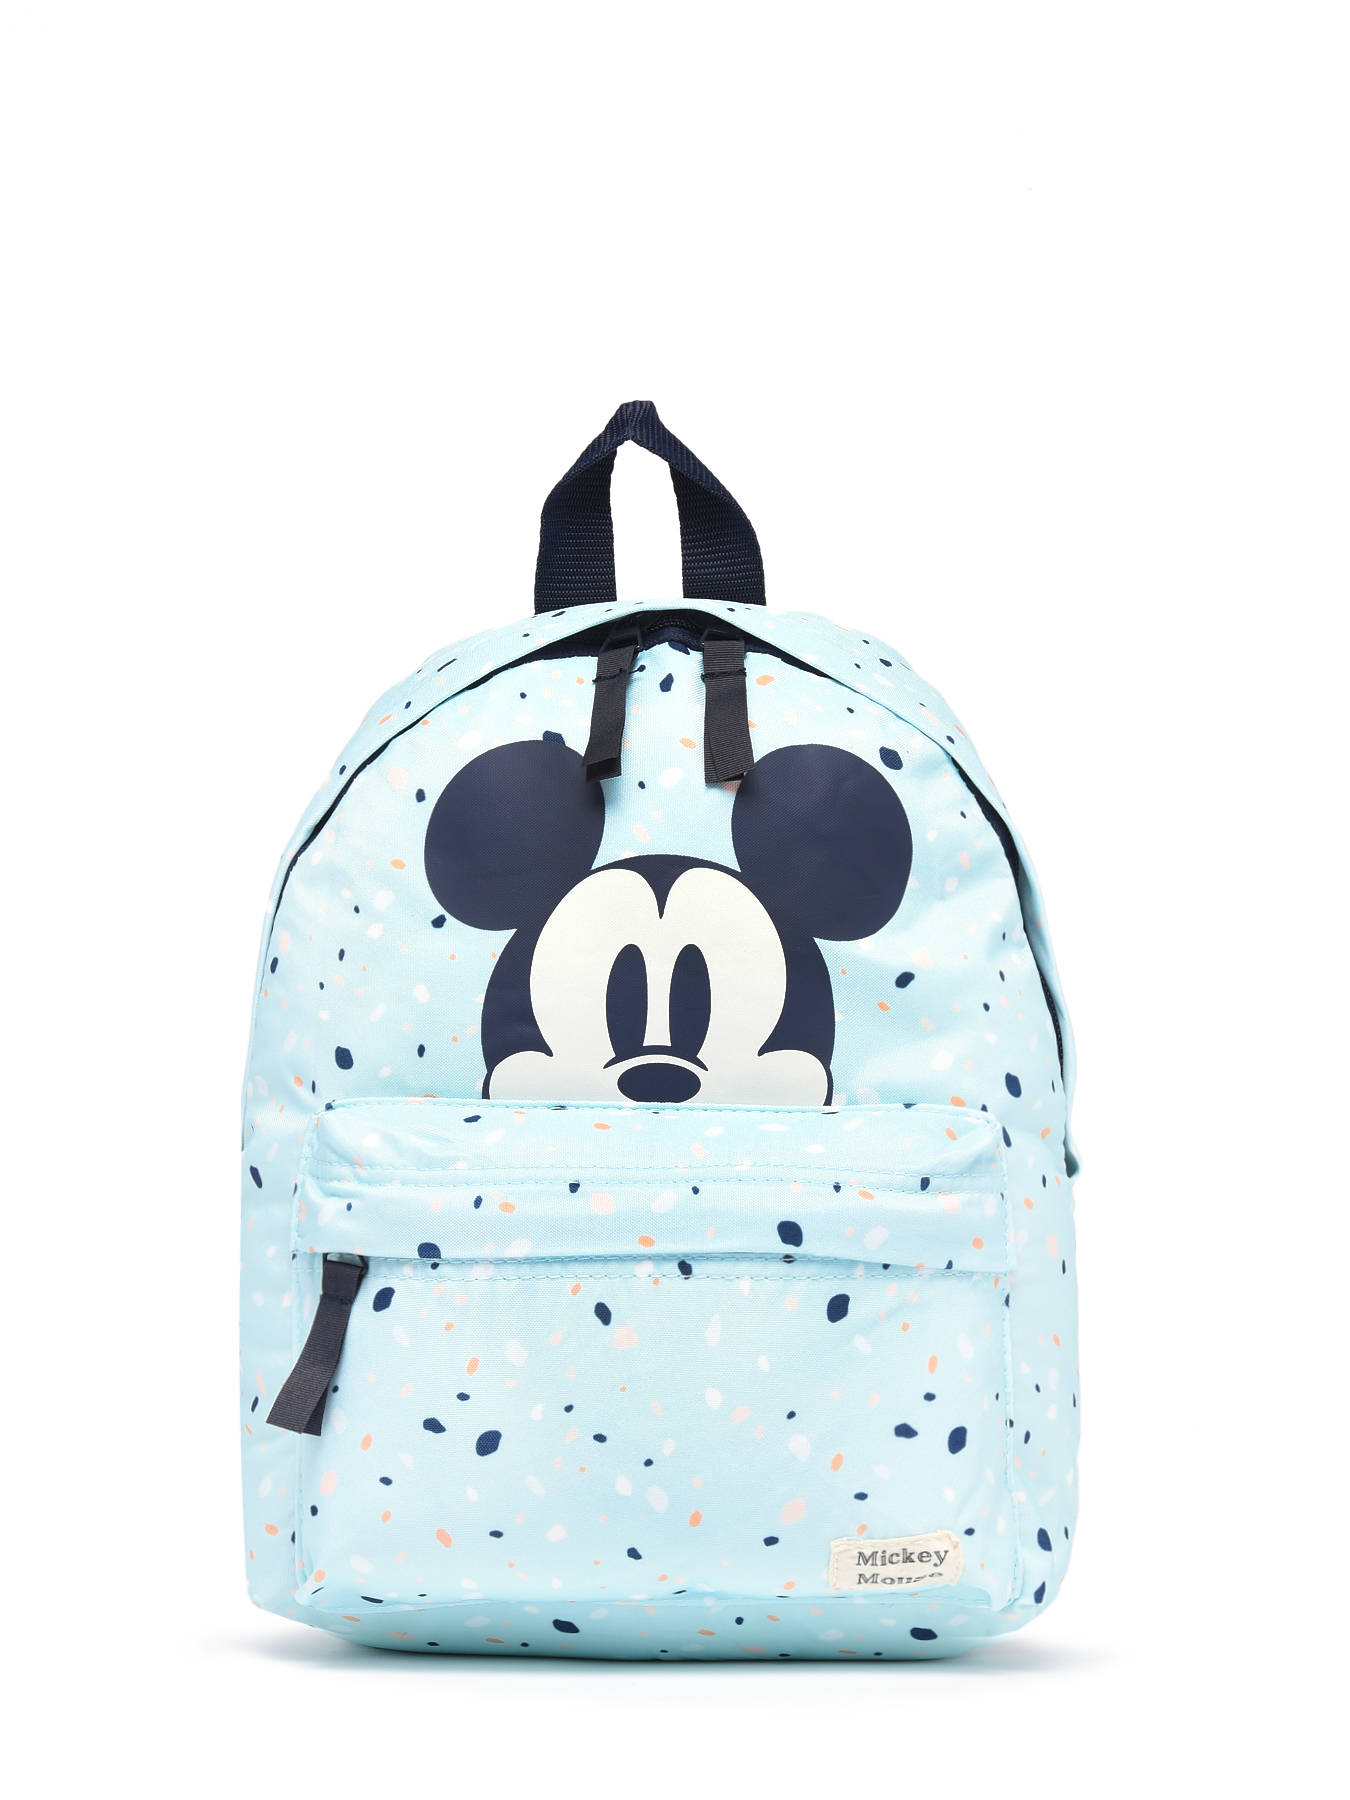 Neff Mickey Mouse Milano Backpack - Black